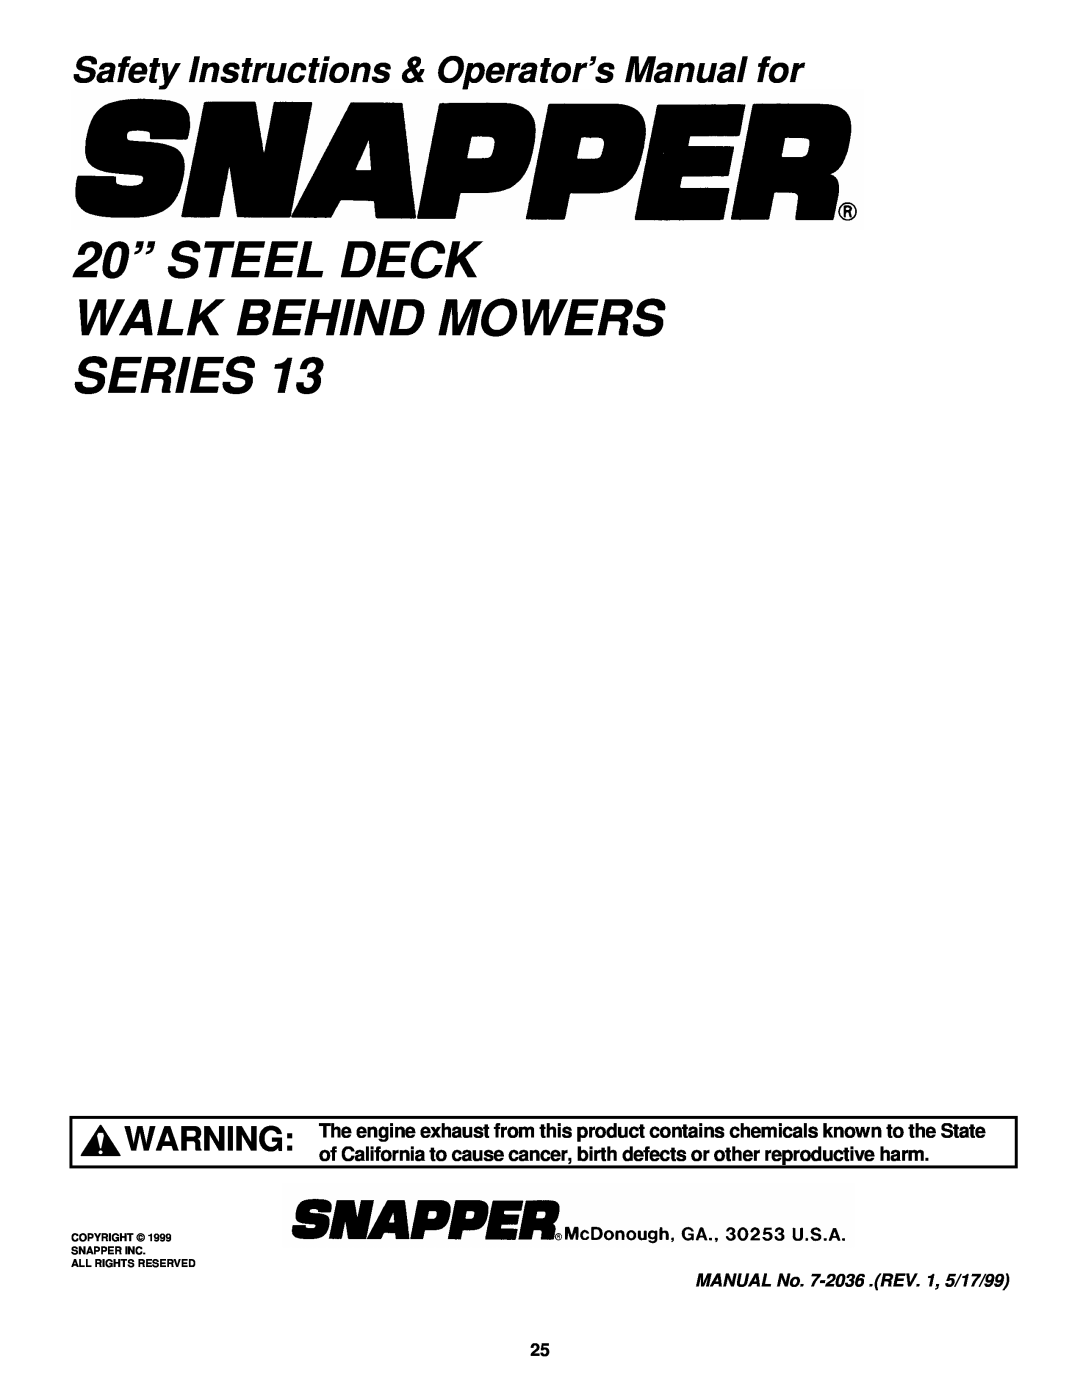 Snapper R204513E 20” STEEL DECK WALK BEHIND MOWERS SERIES, Safety Instructions & Operator’s Manual for 